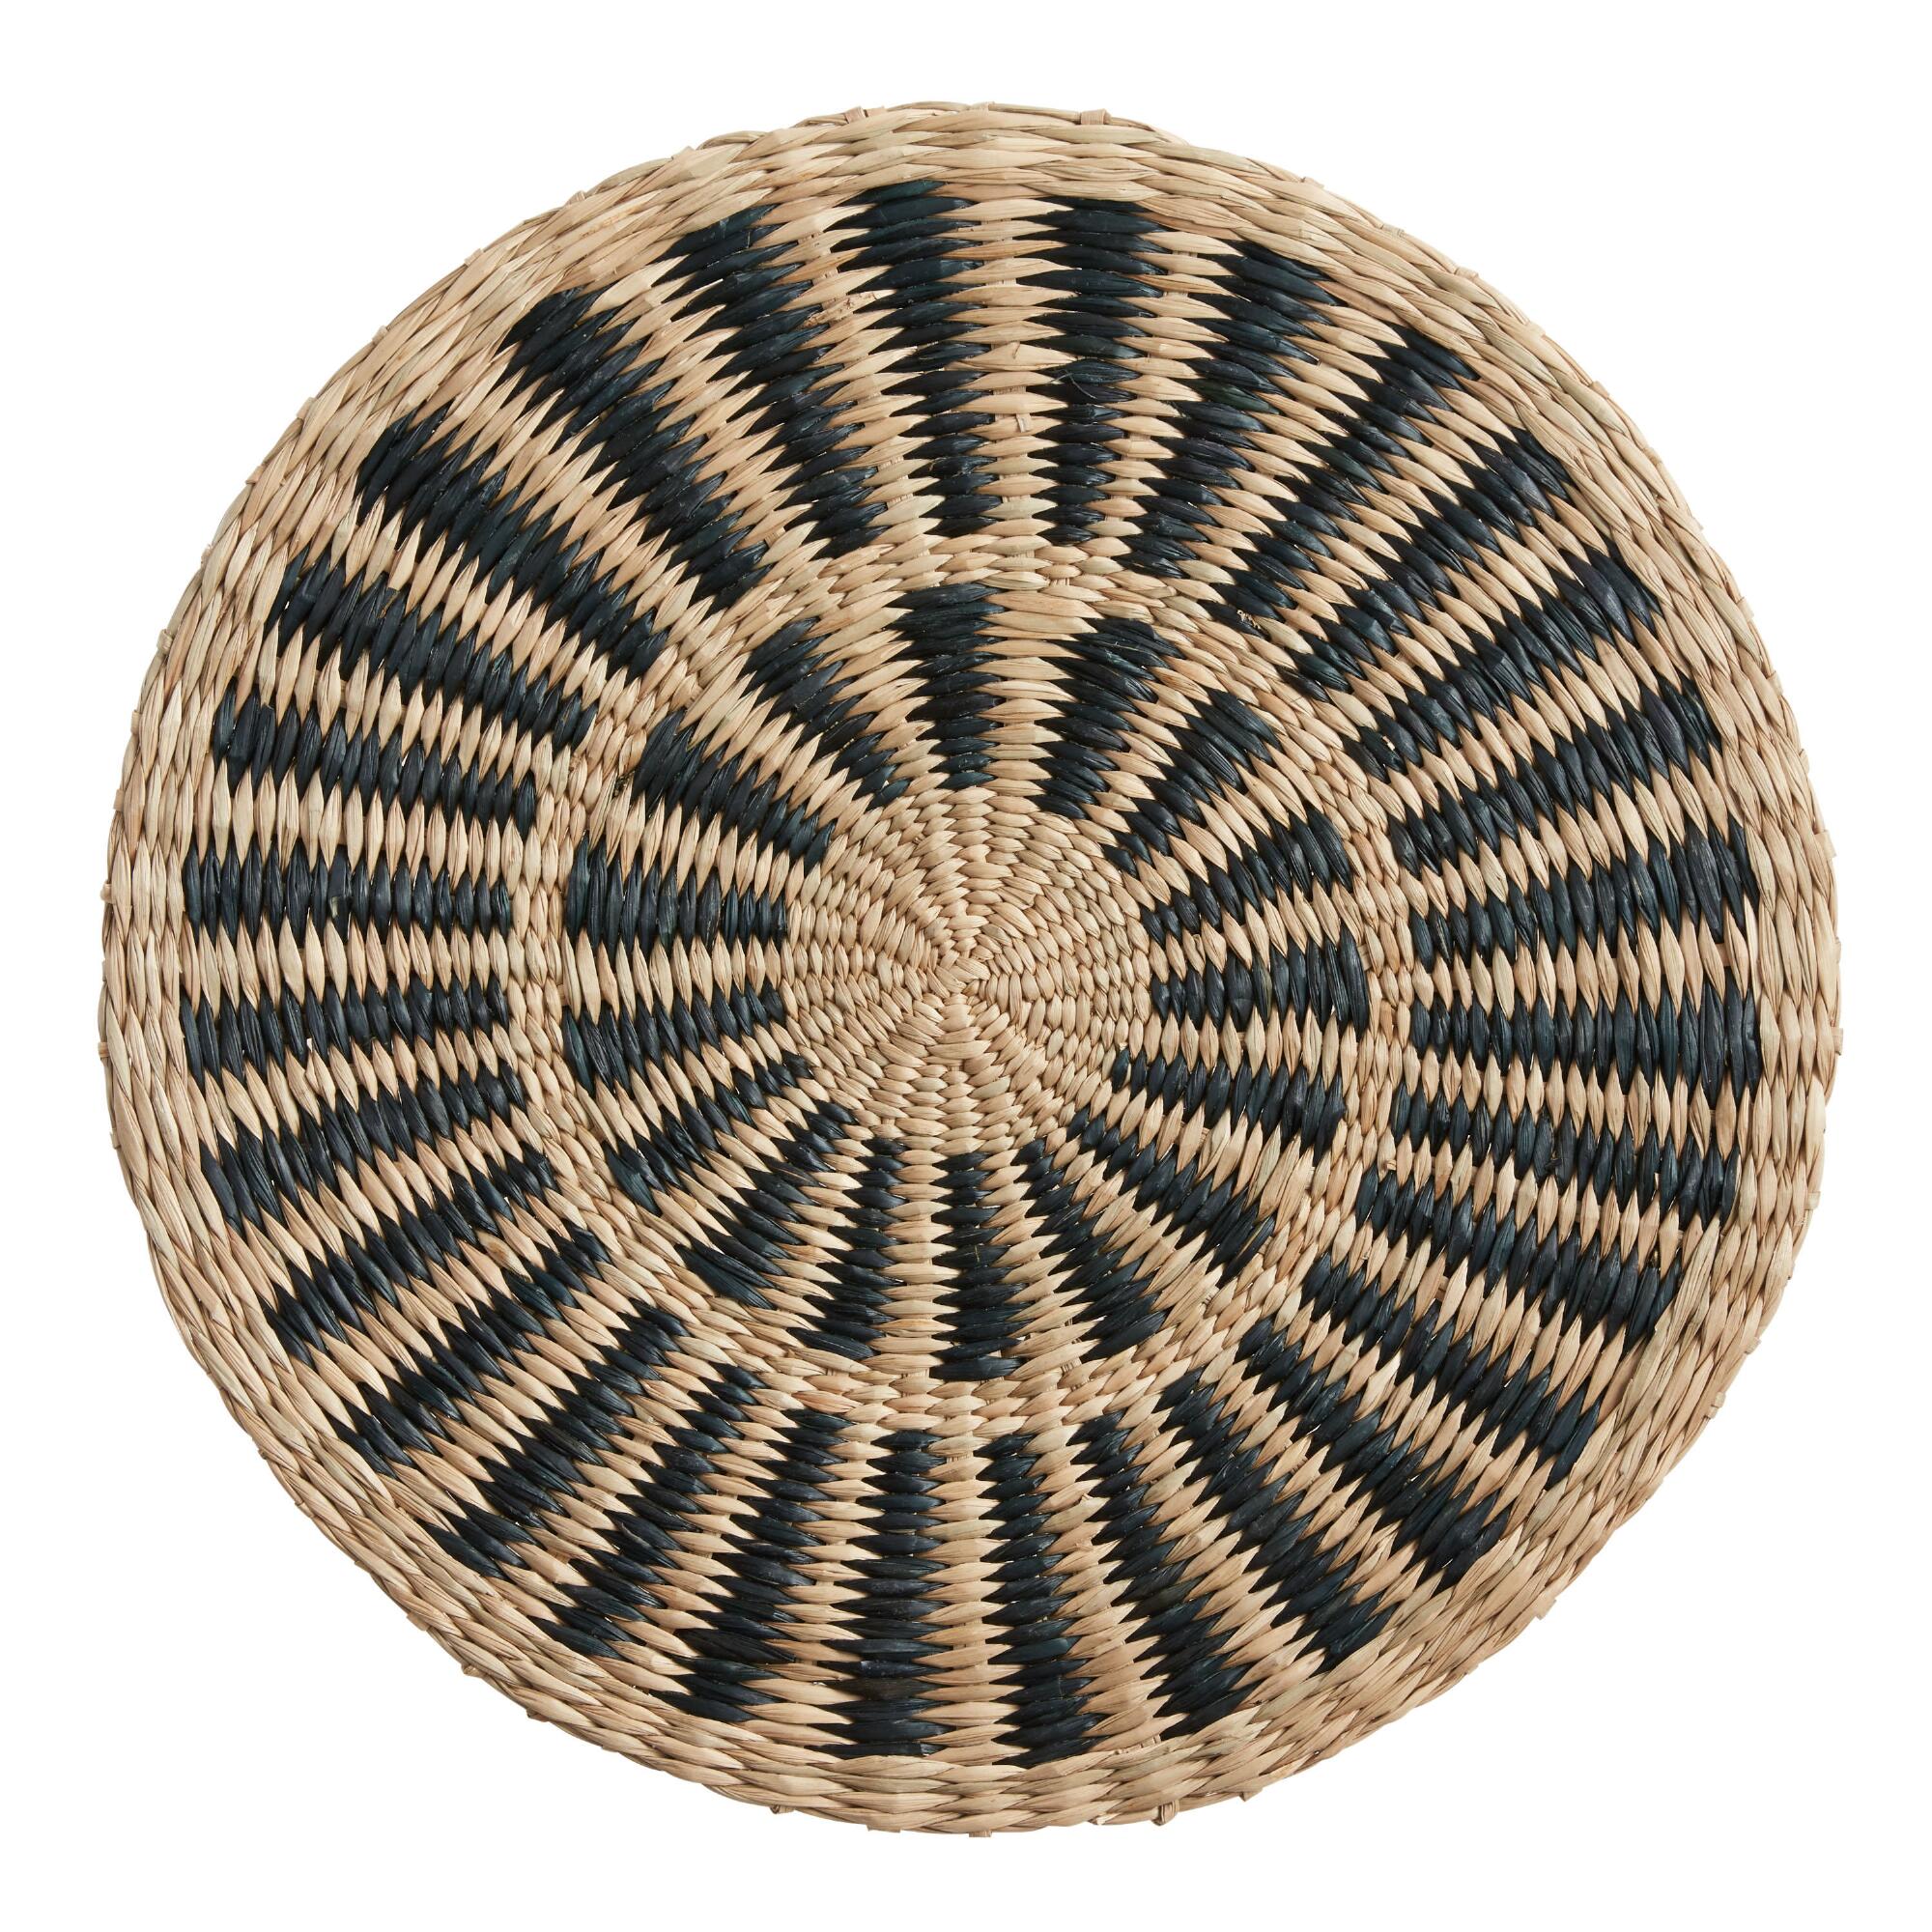 Round natural and black woven fiber placemat against a white background.